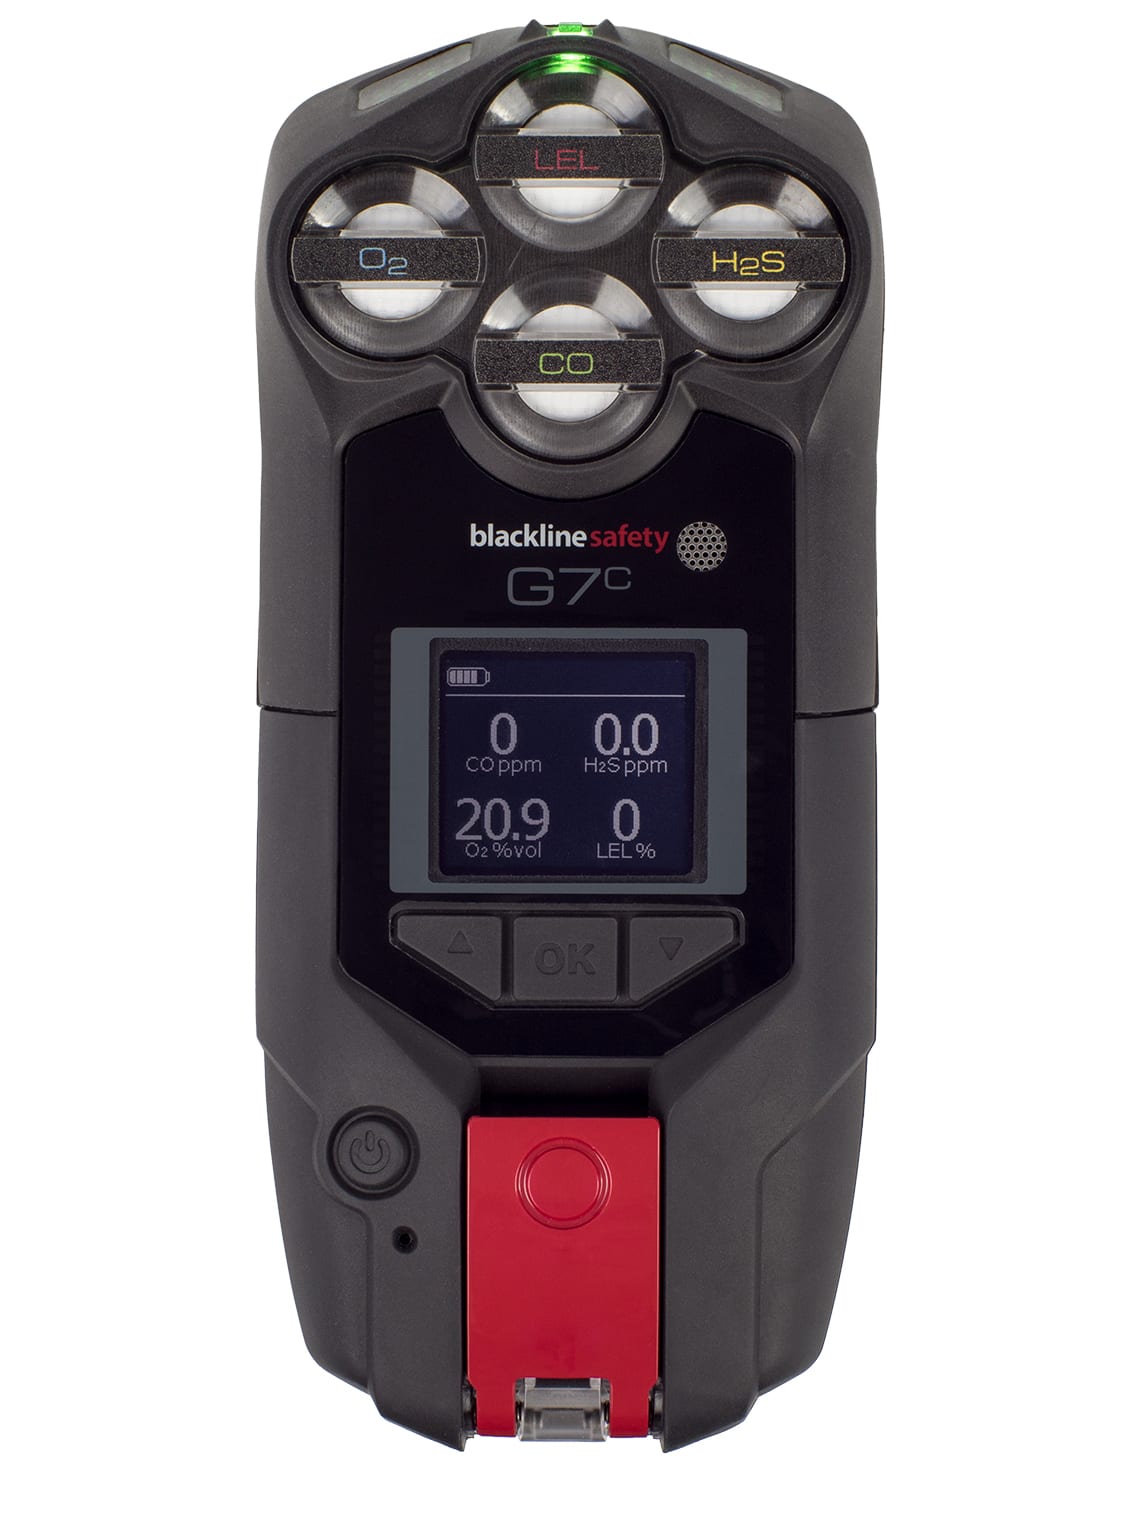 Lone worker gas detection device g7c